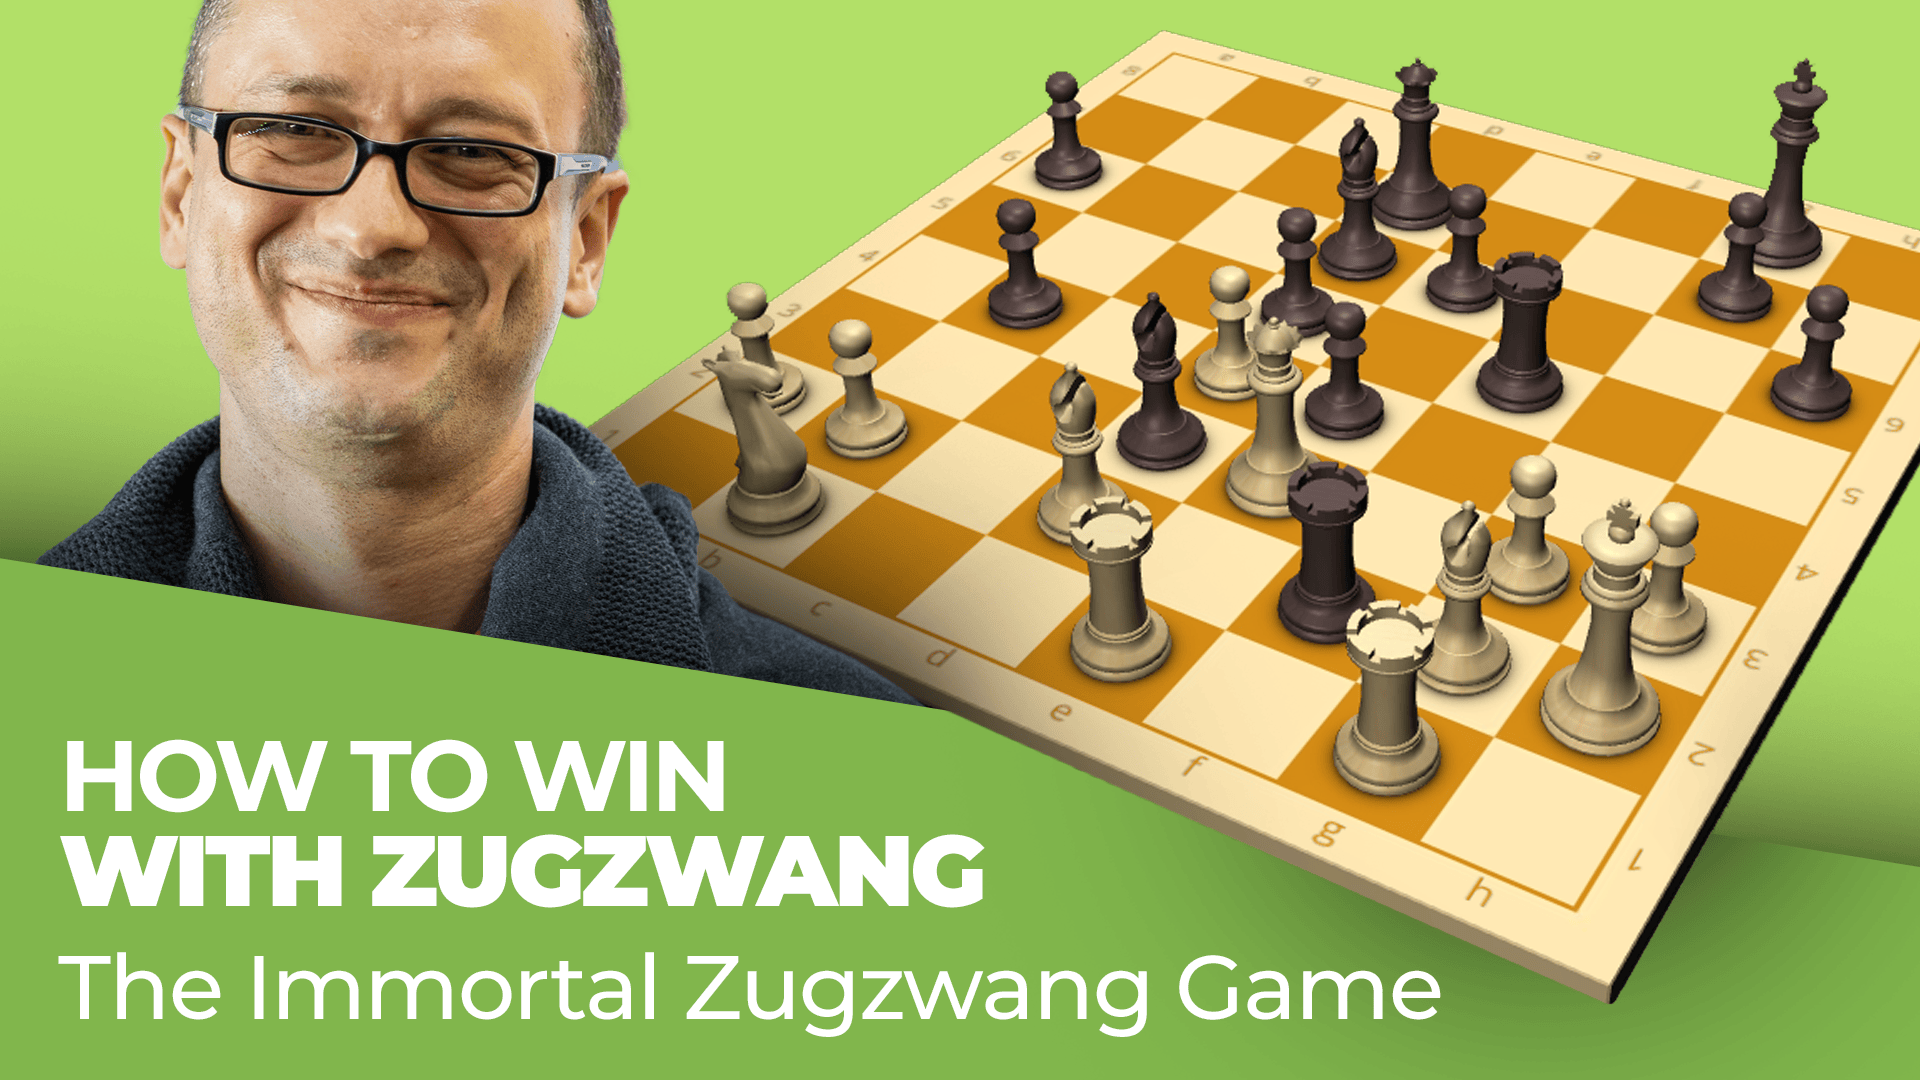 What does zugzwang mean in a chess game? - Quora